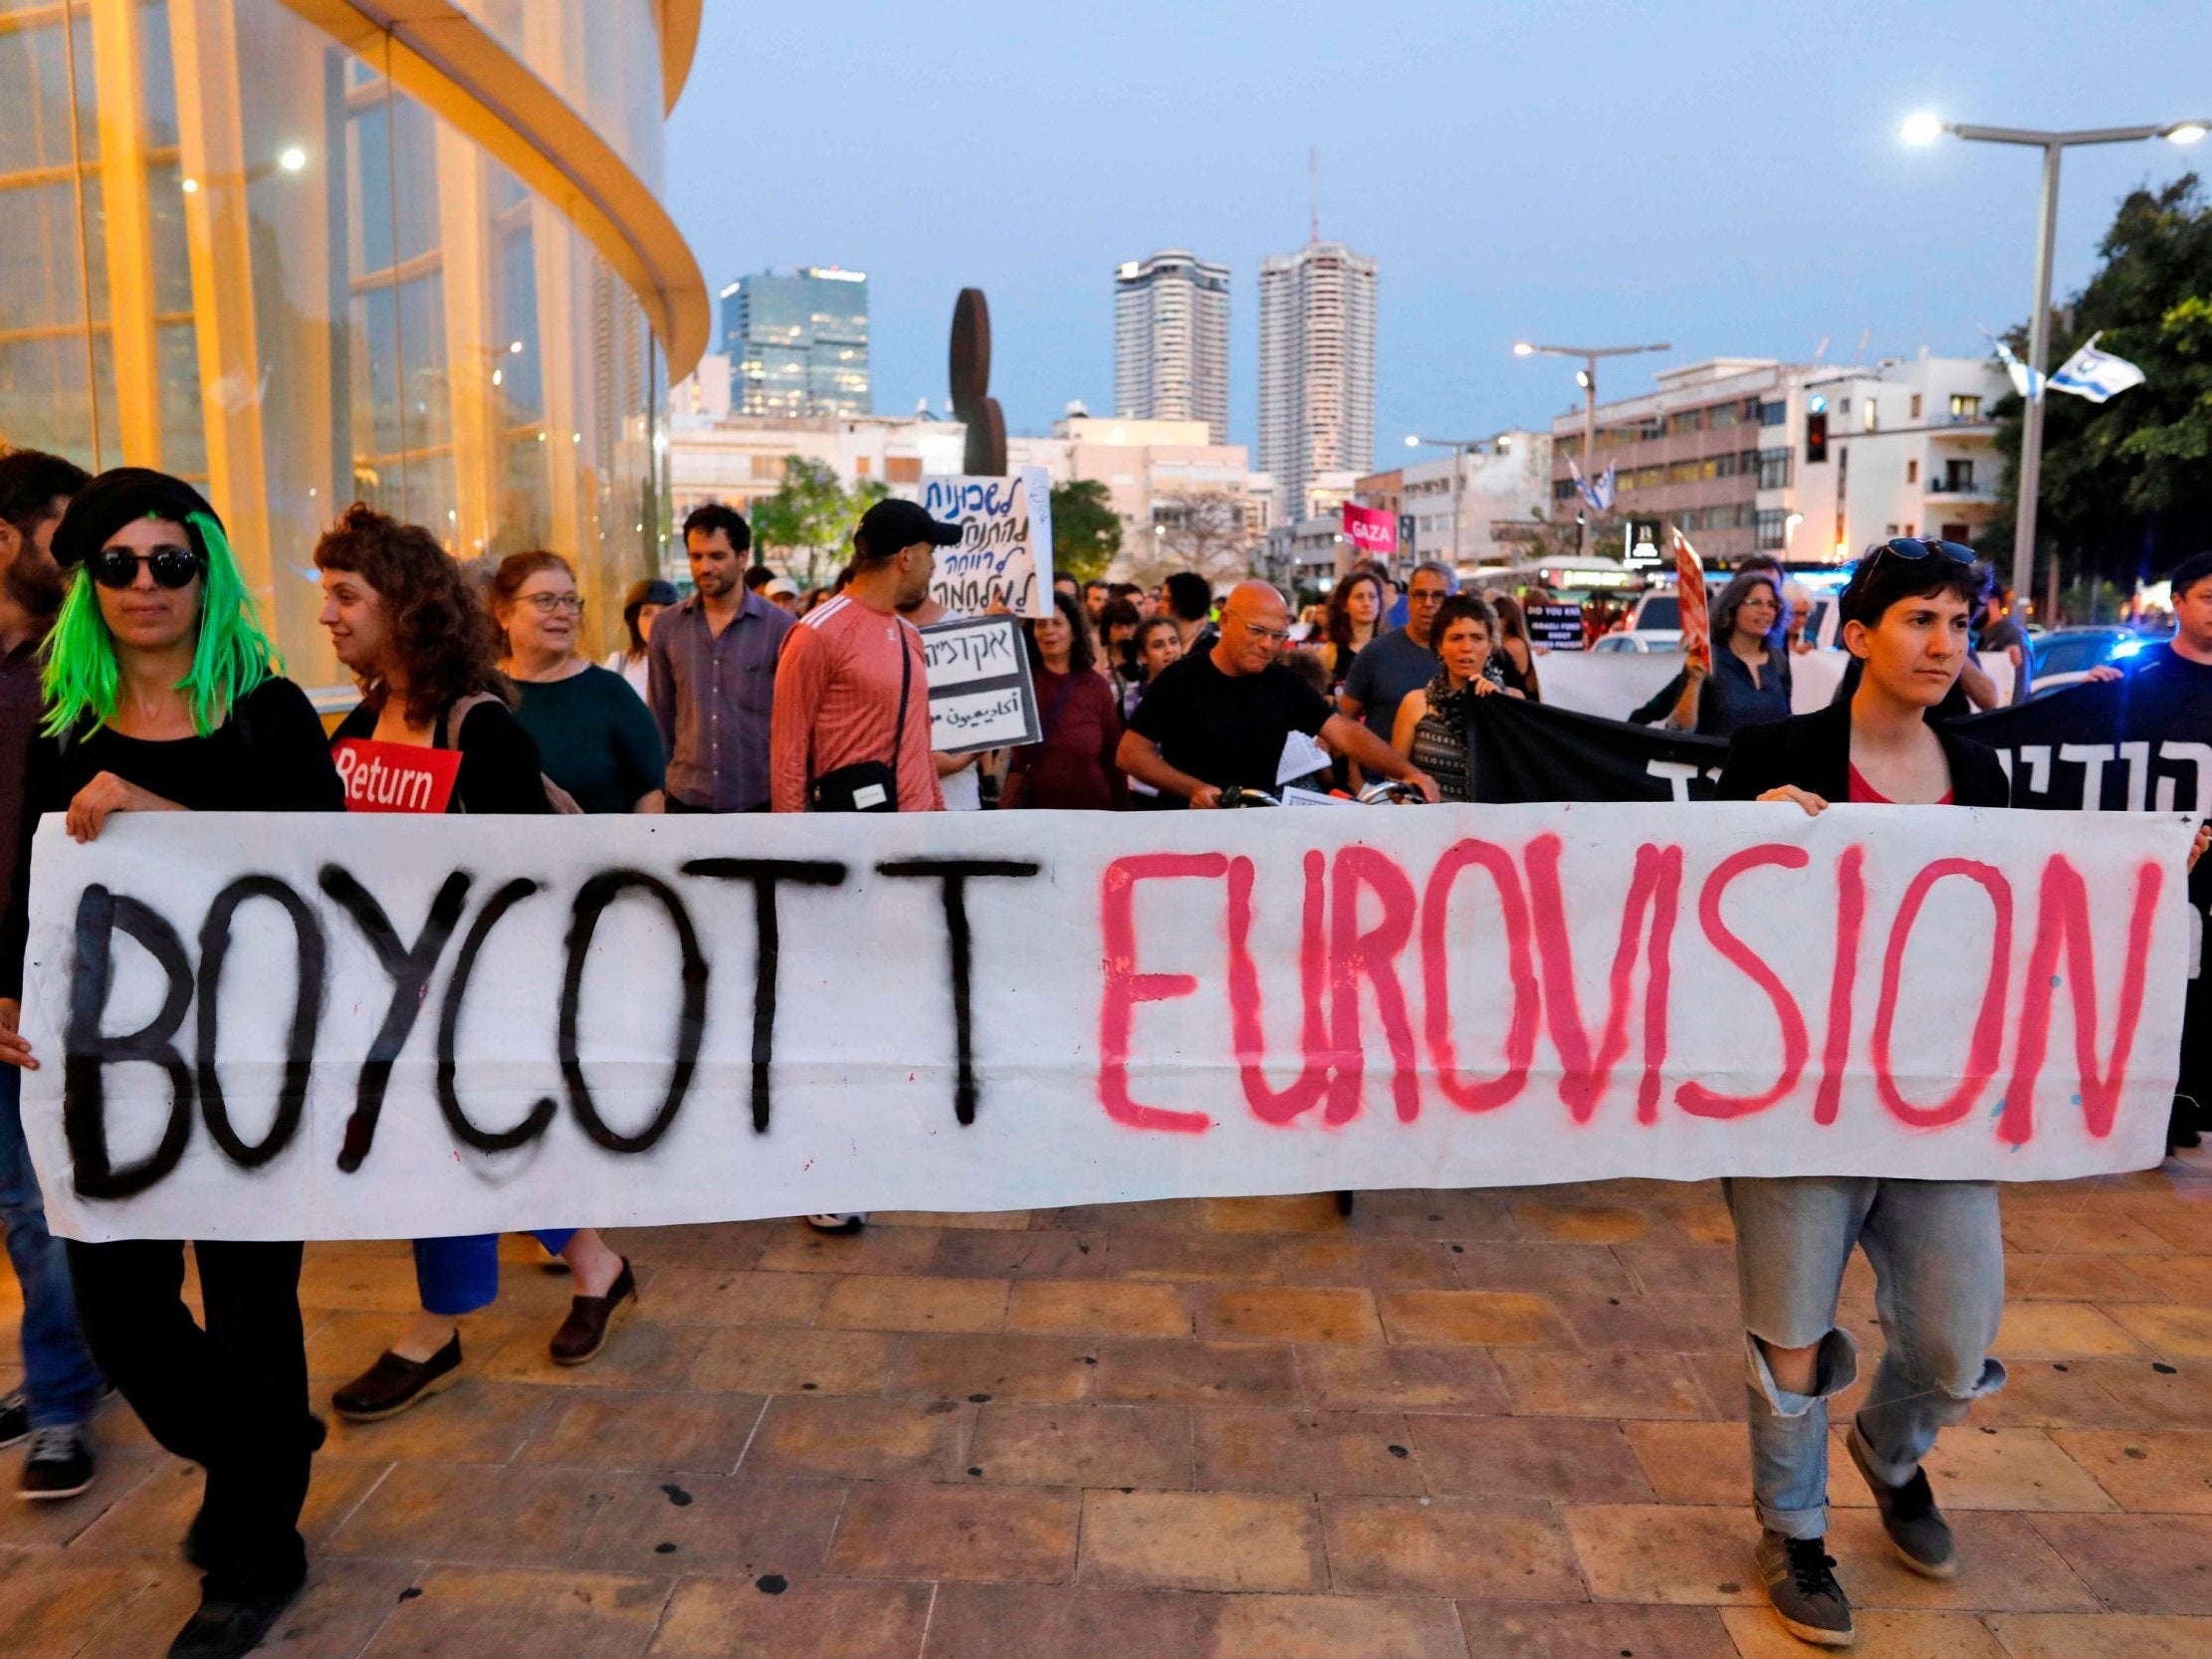 Left wing Israelis hold slogans during a protest against Eurovision on May 14, 2019 in Tel Aviv.